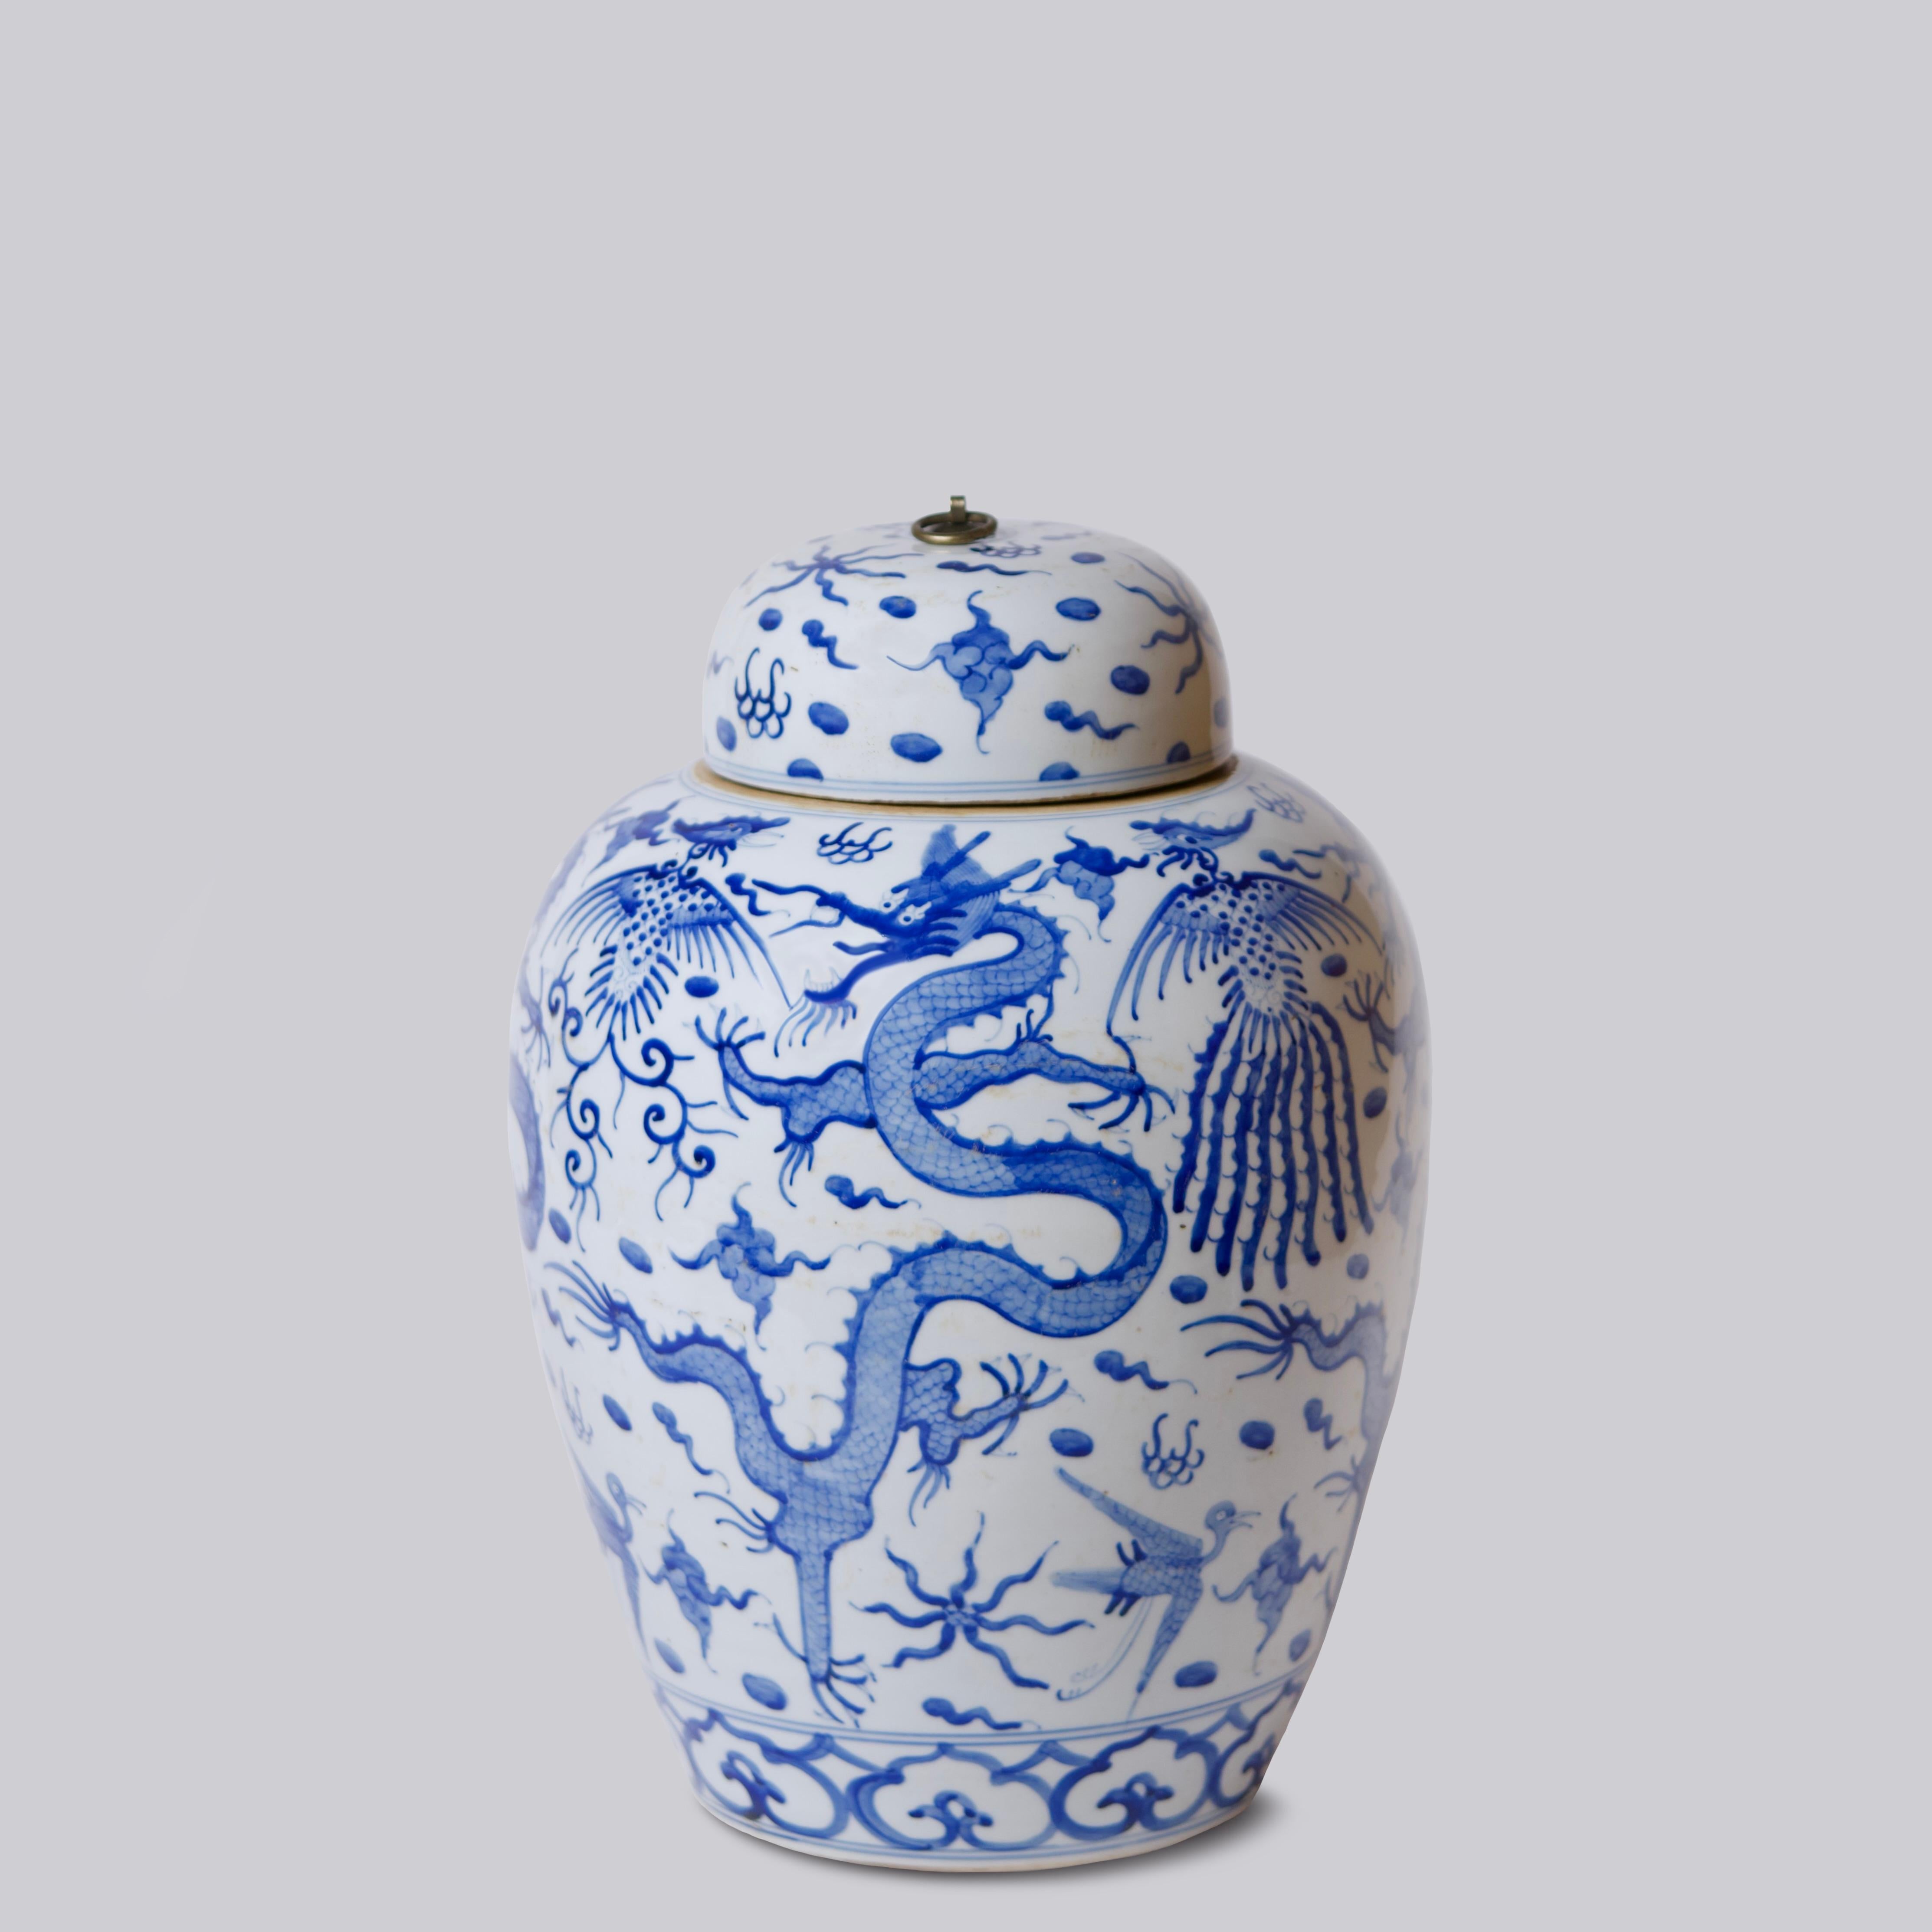 This lidded jar is a traditional porcelain vessel from Jingdezhen, a town long distinguished by imperial patronage. The porcelain lid has been augmented with a metal ring to add a material interest to the piece. This temple jar decorated with